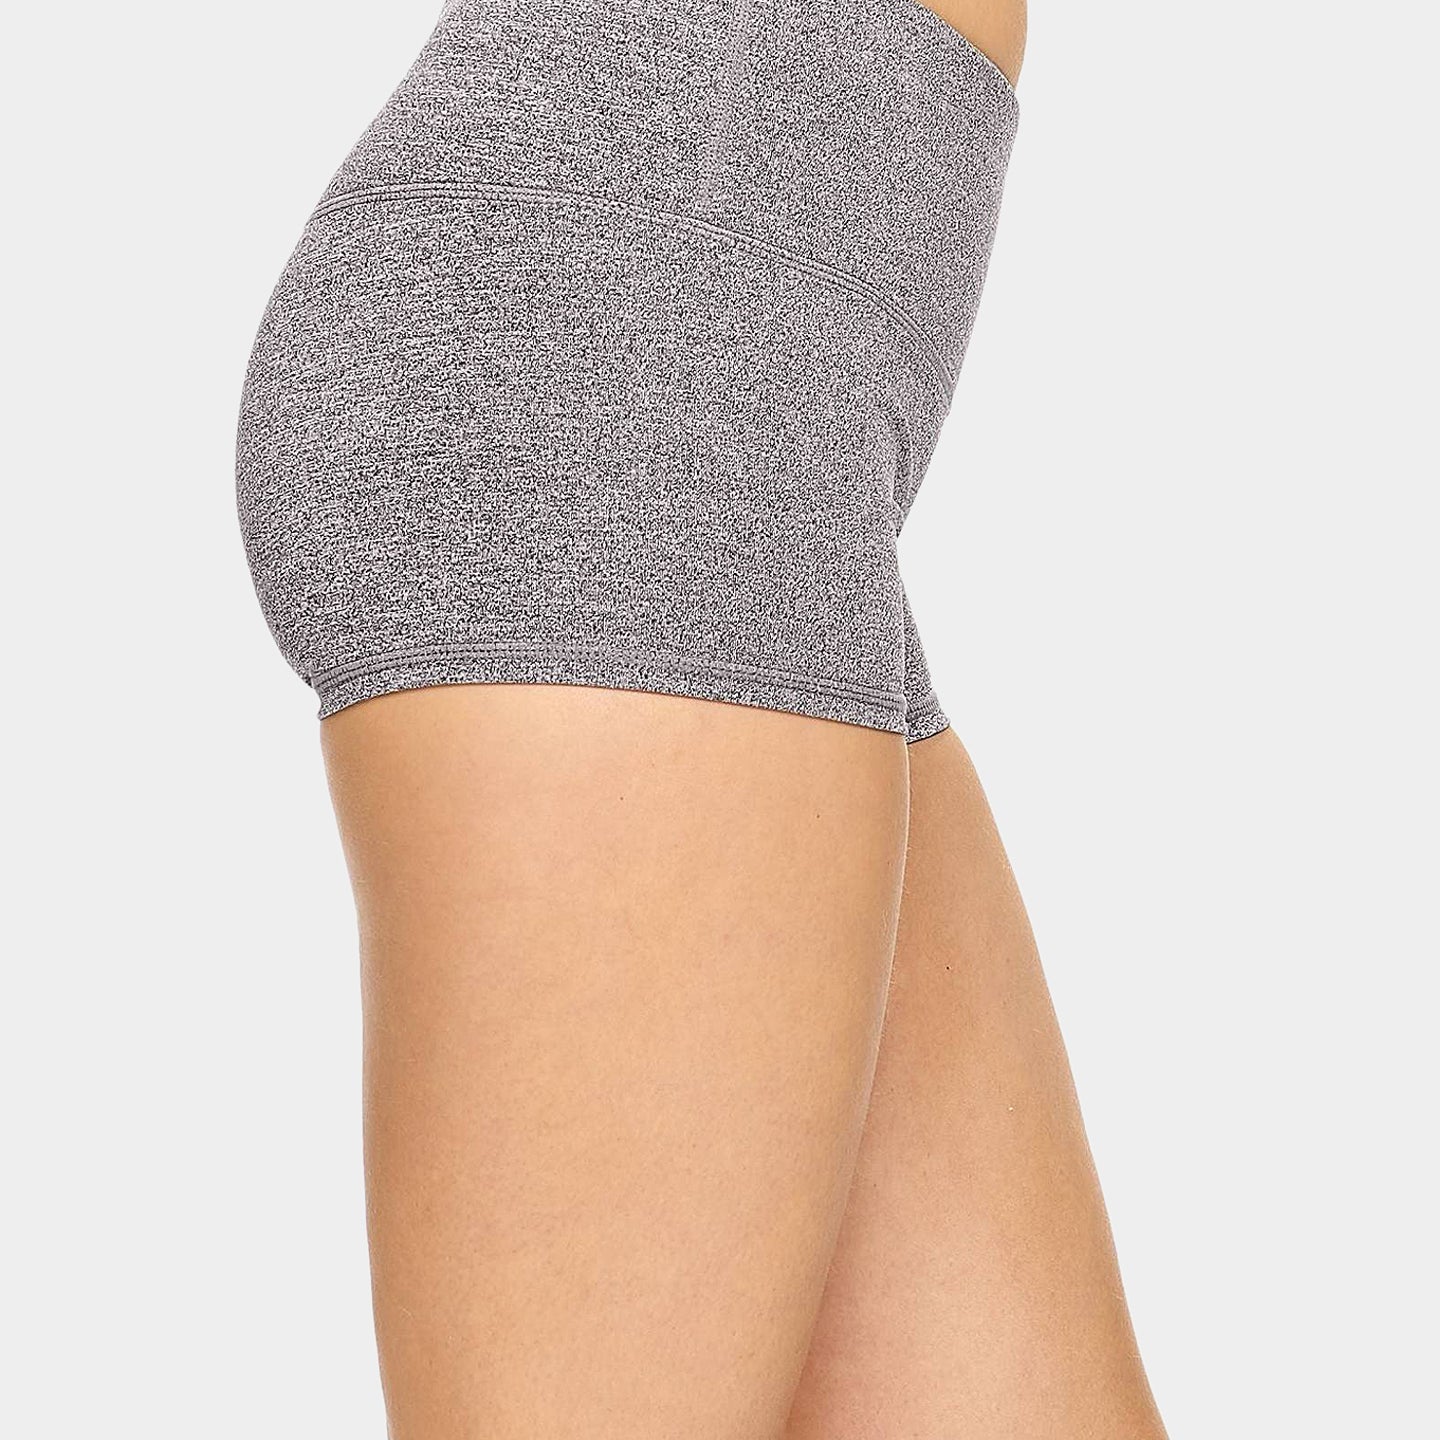 Expert Brand Women's Airstretch 2" Heartbreaker Shorts, L, Heather Charcoal A1